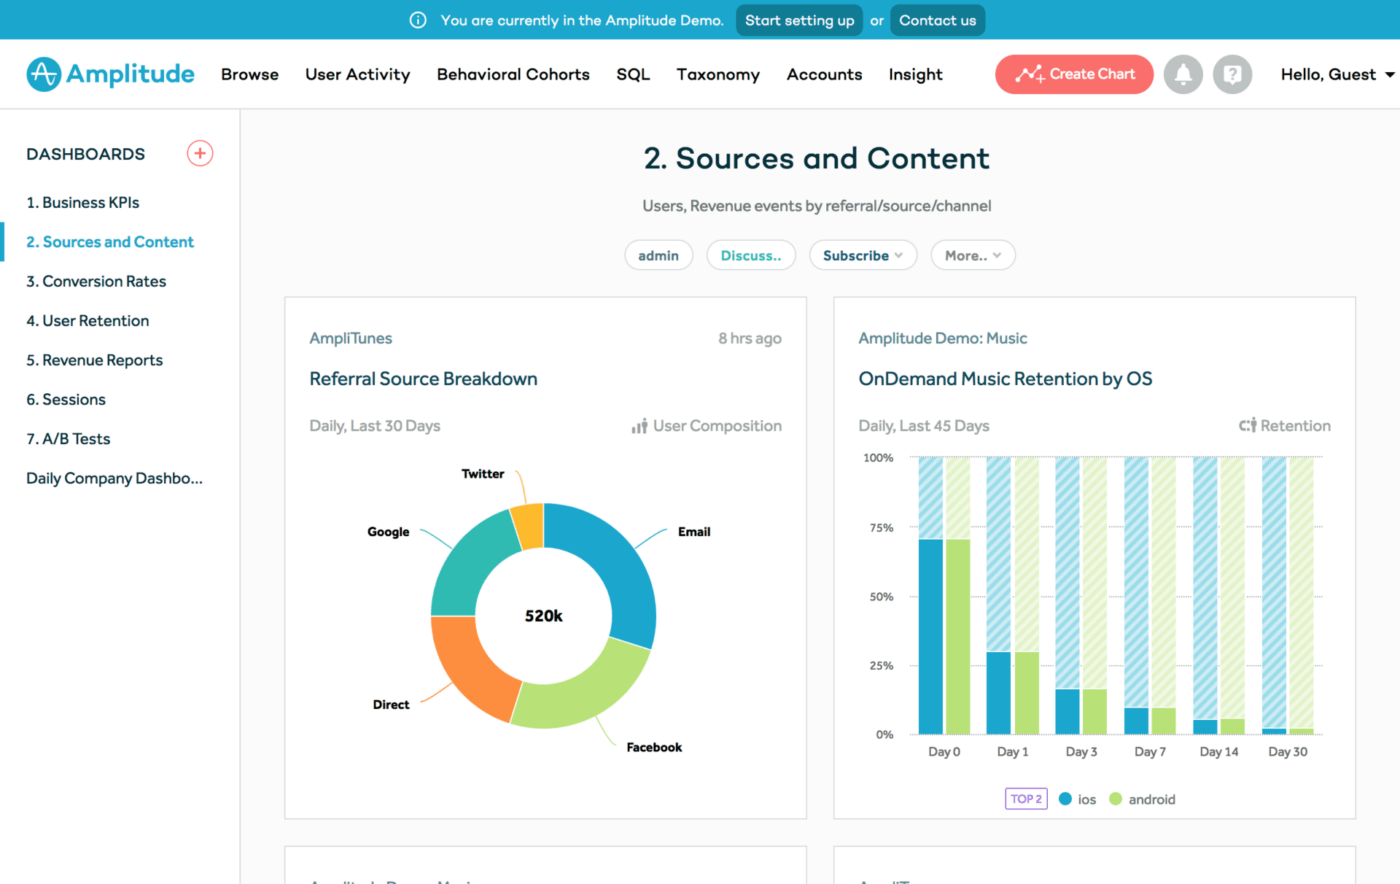 View dashboards with analytics in Amplitude to make data-driven decisions